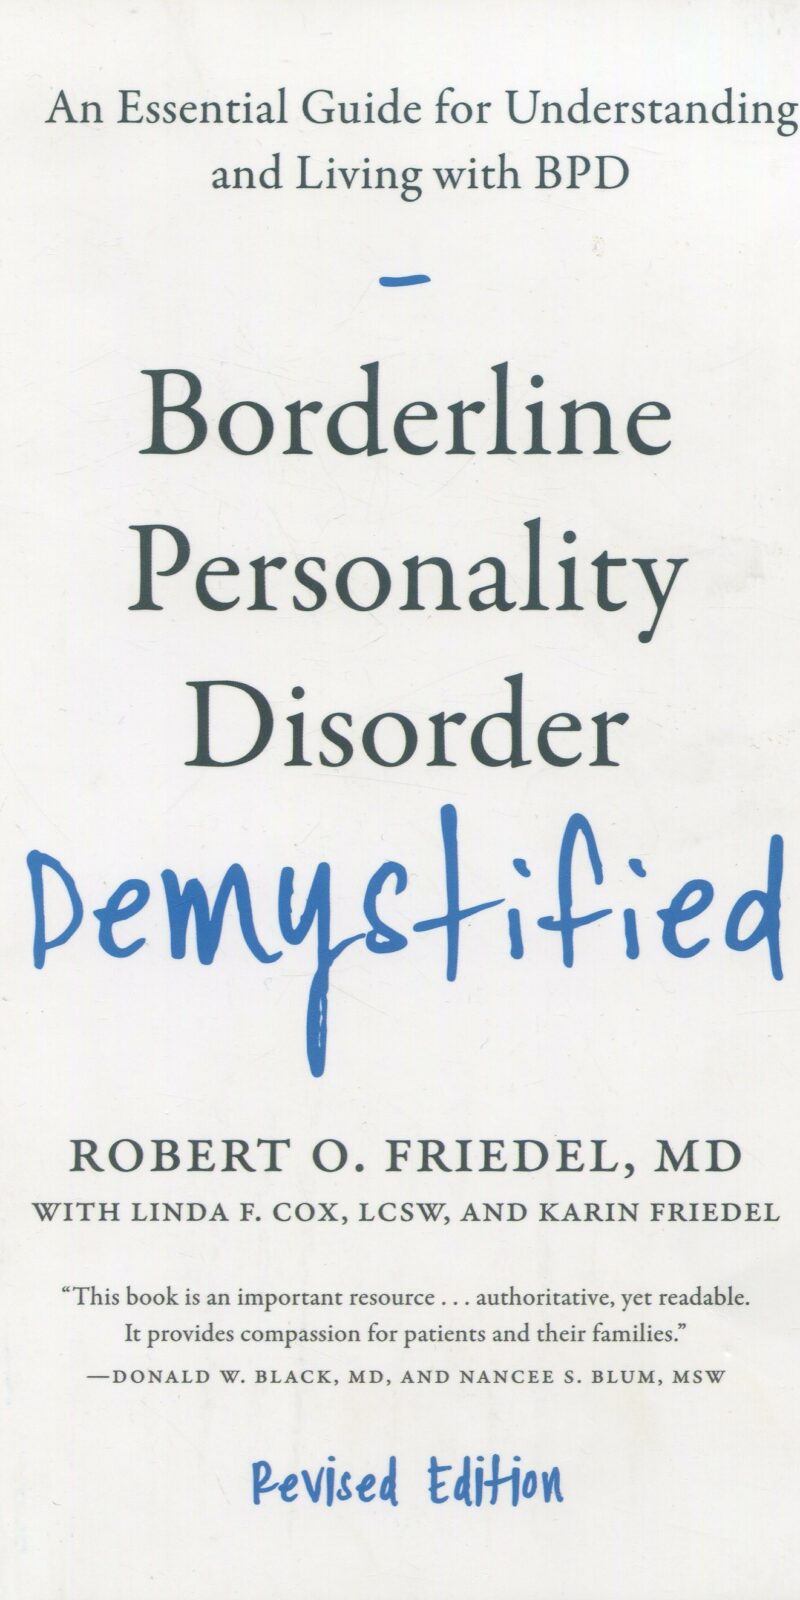 Borderline Personality Disorder Demystified / 9780738220246